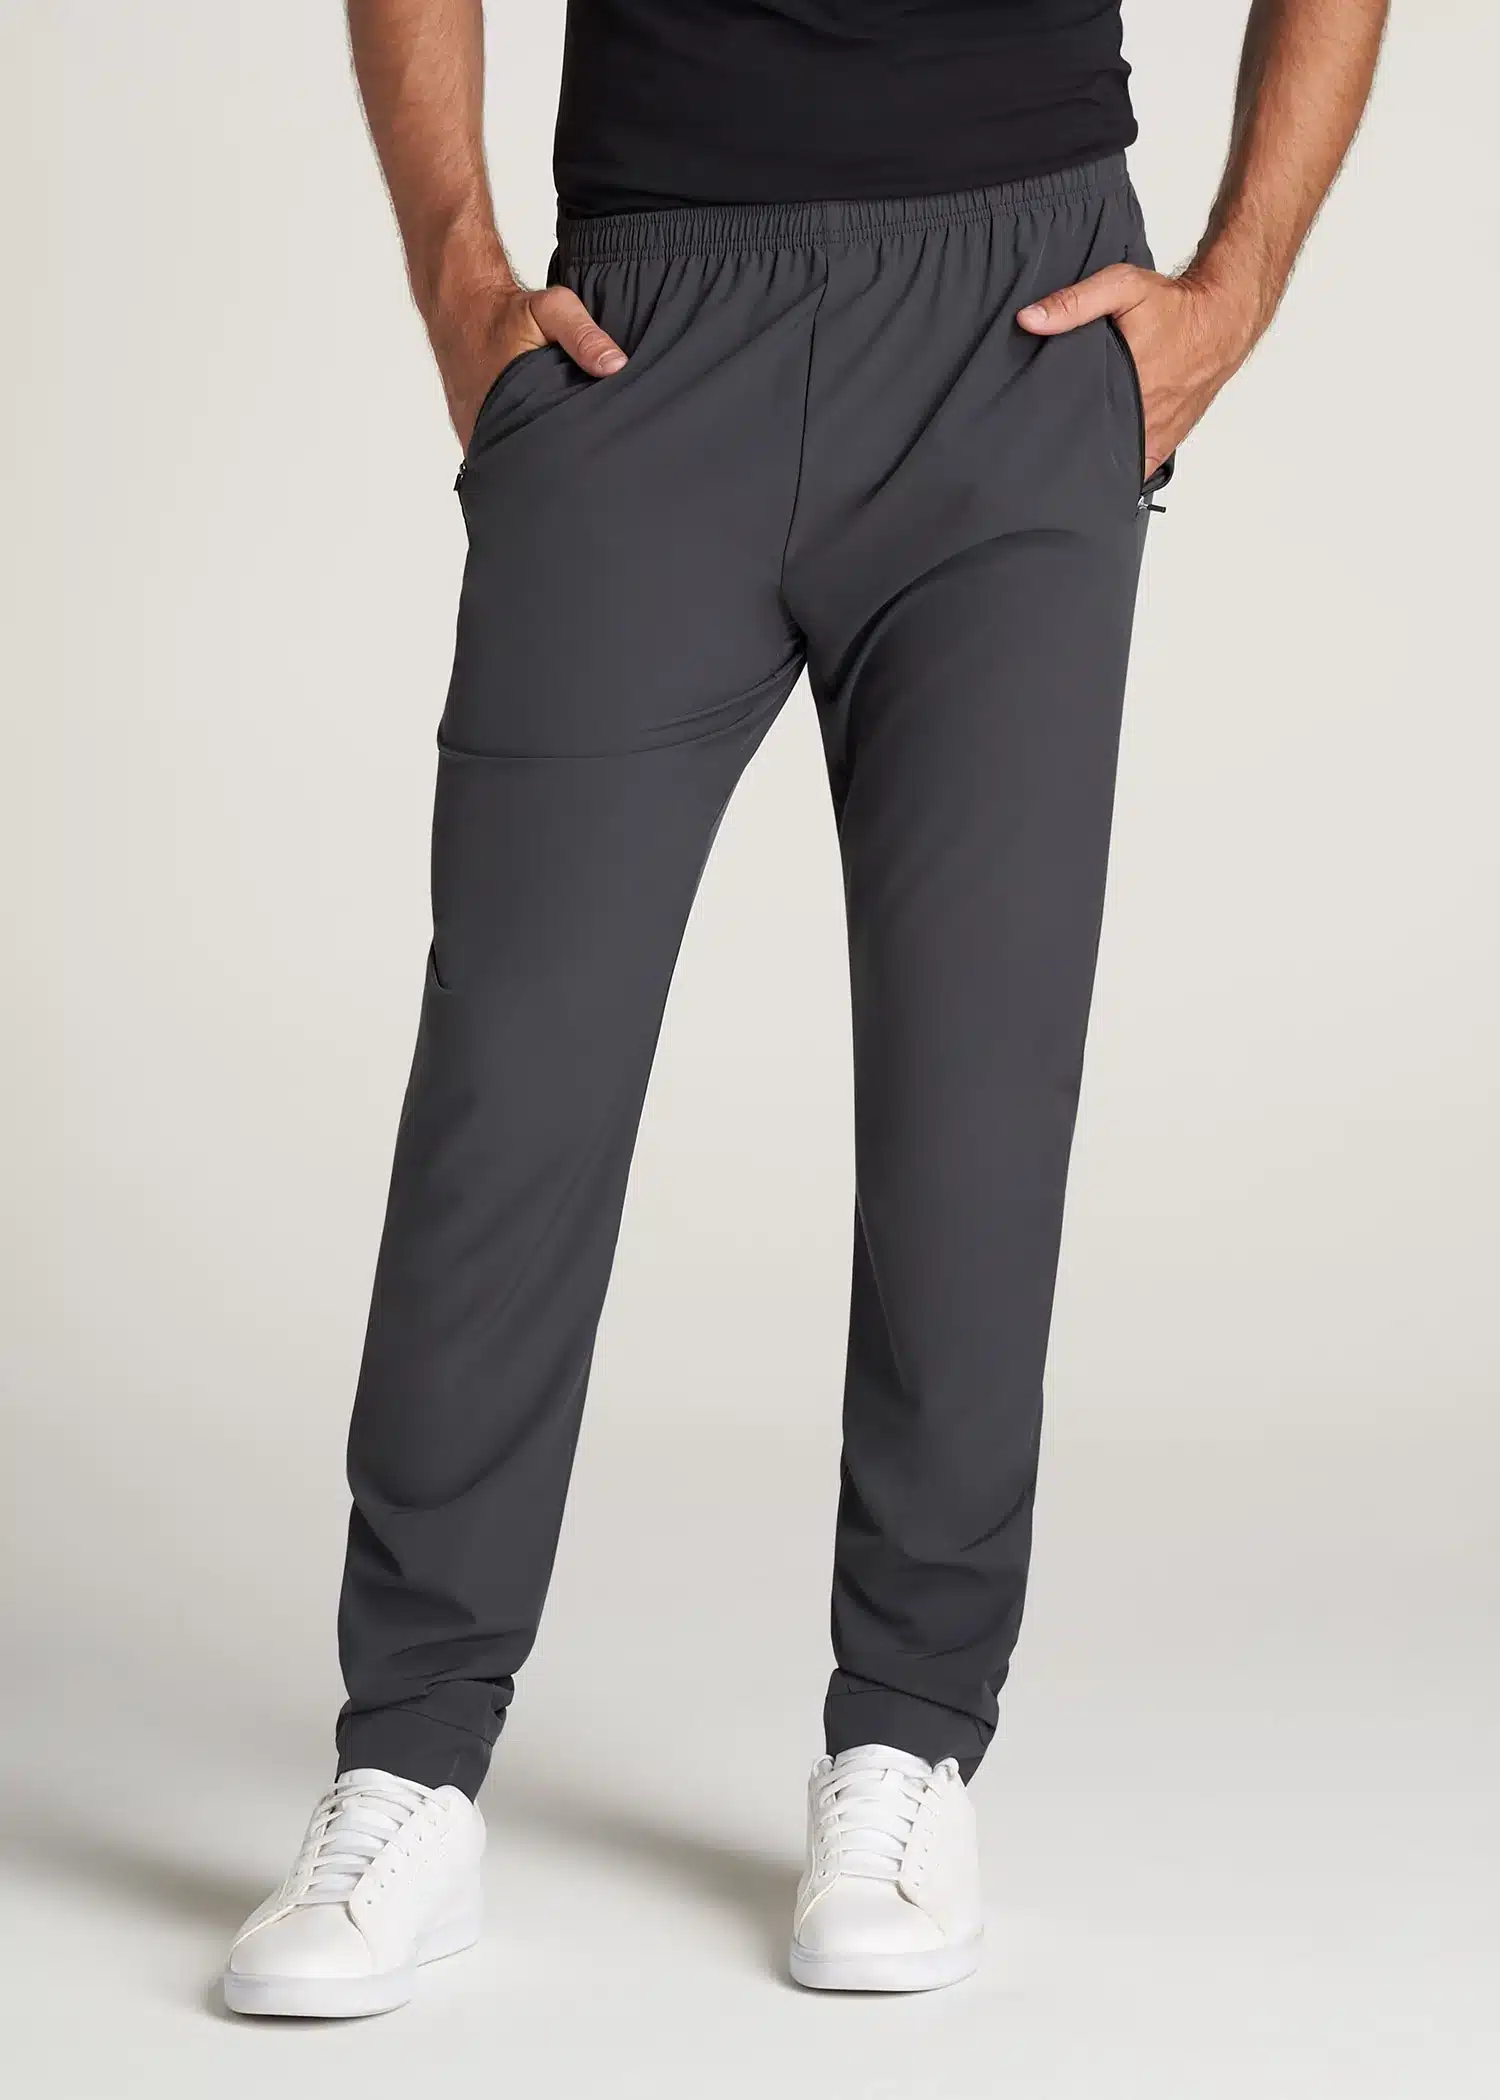 https://elevated.style/wp-content/uploads/2020/09/American-Tall-Men-TaperedFit-LightWeight-AthleticPant-Charcoal-front.webp